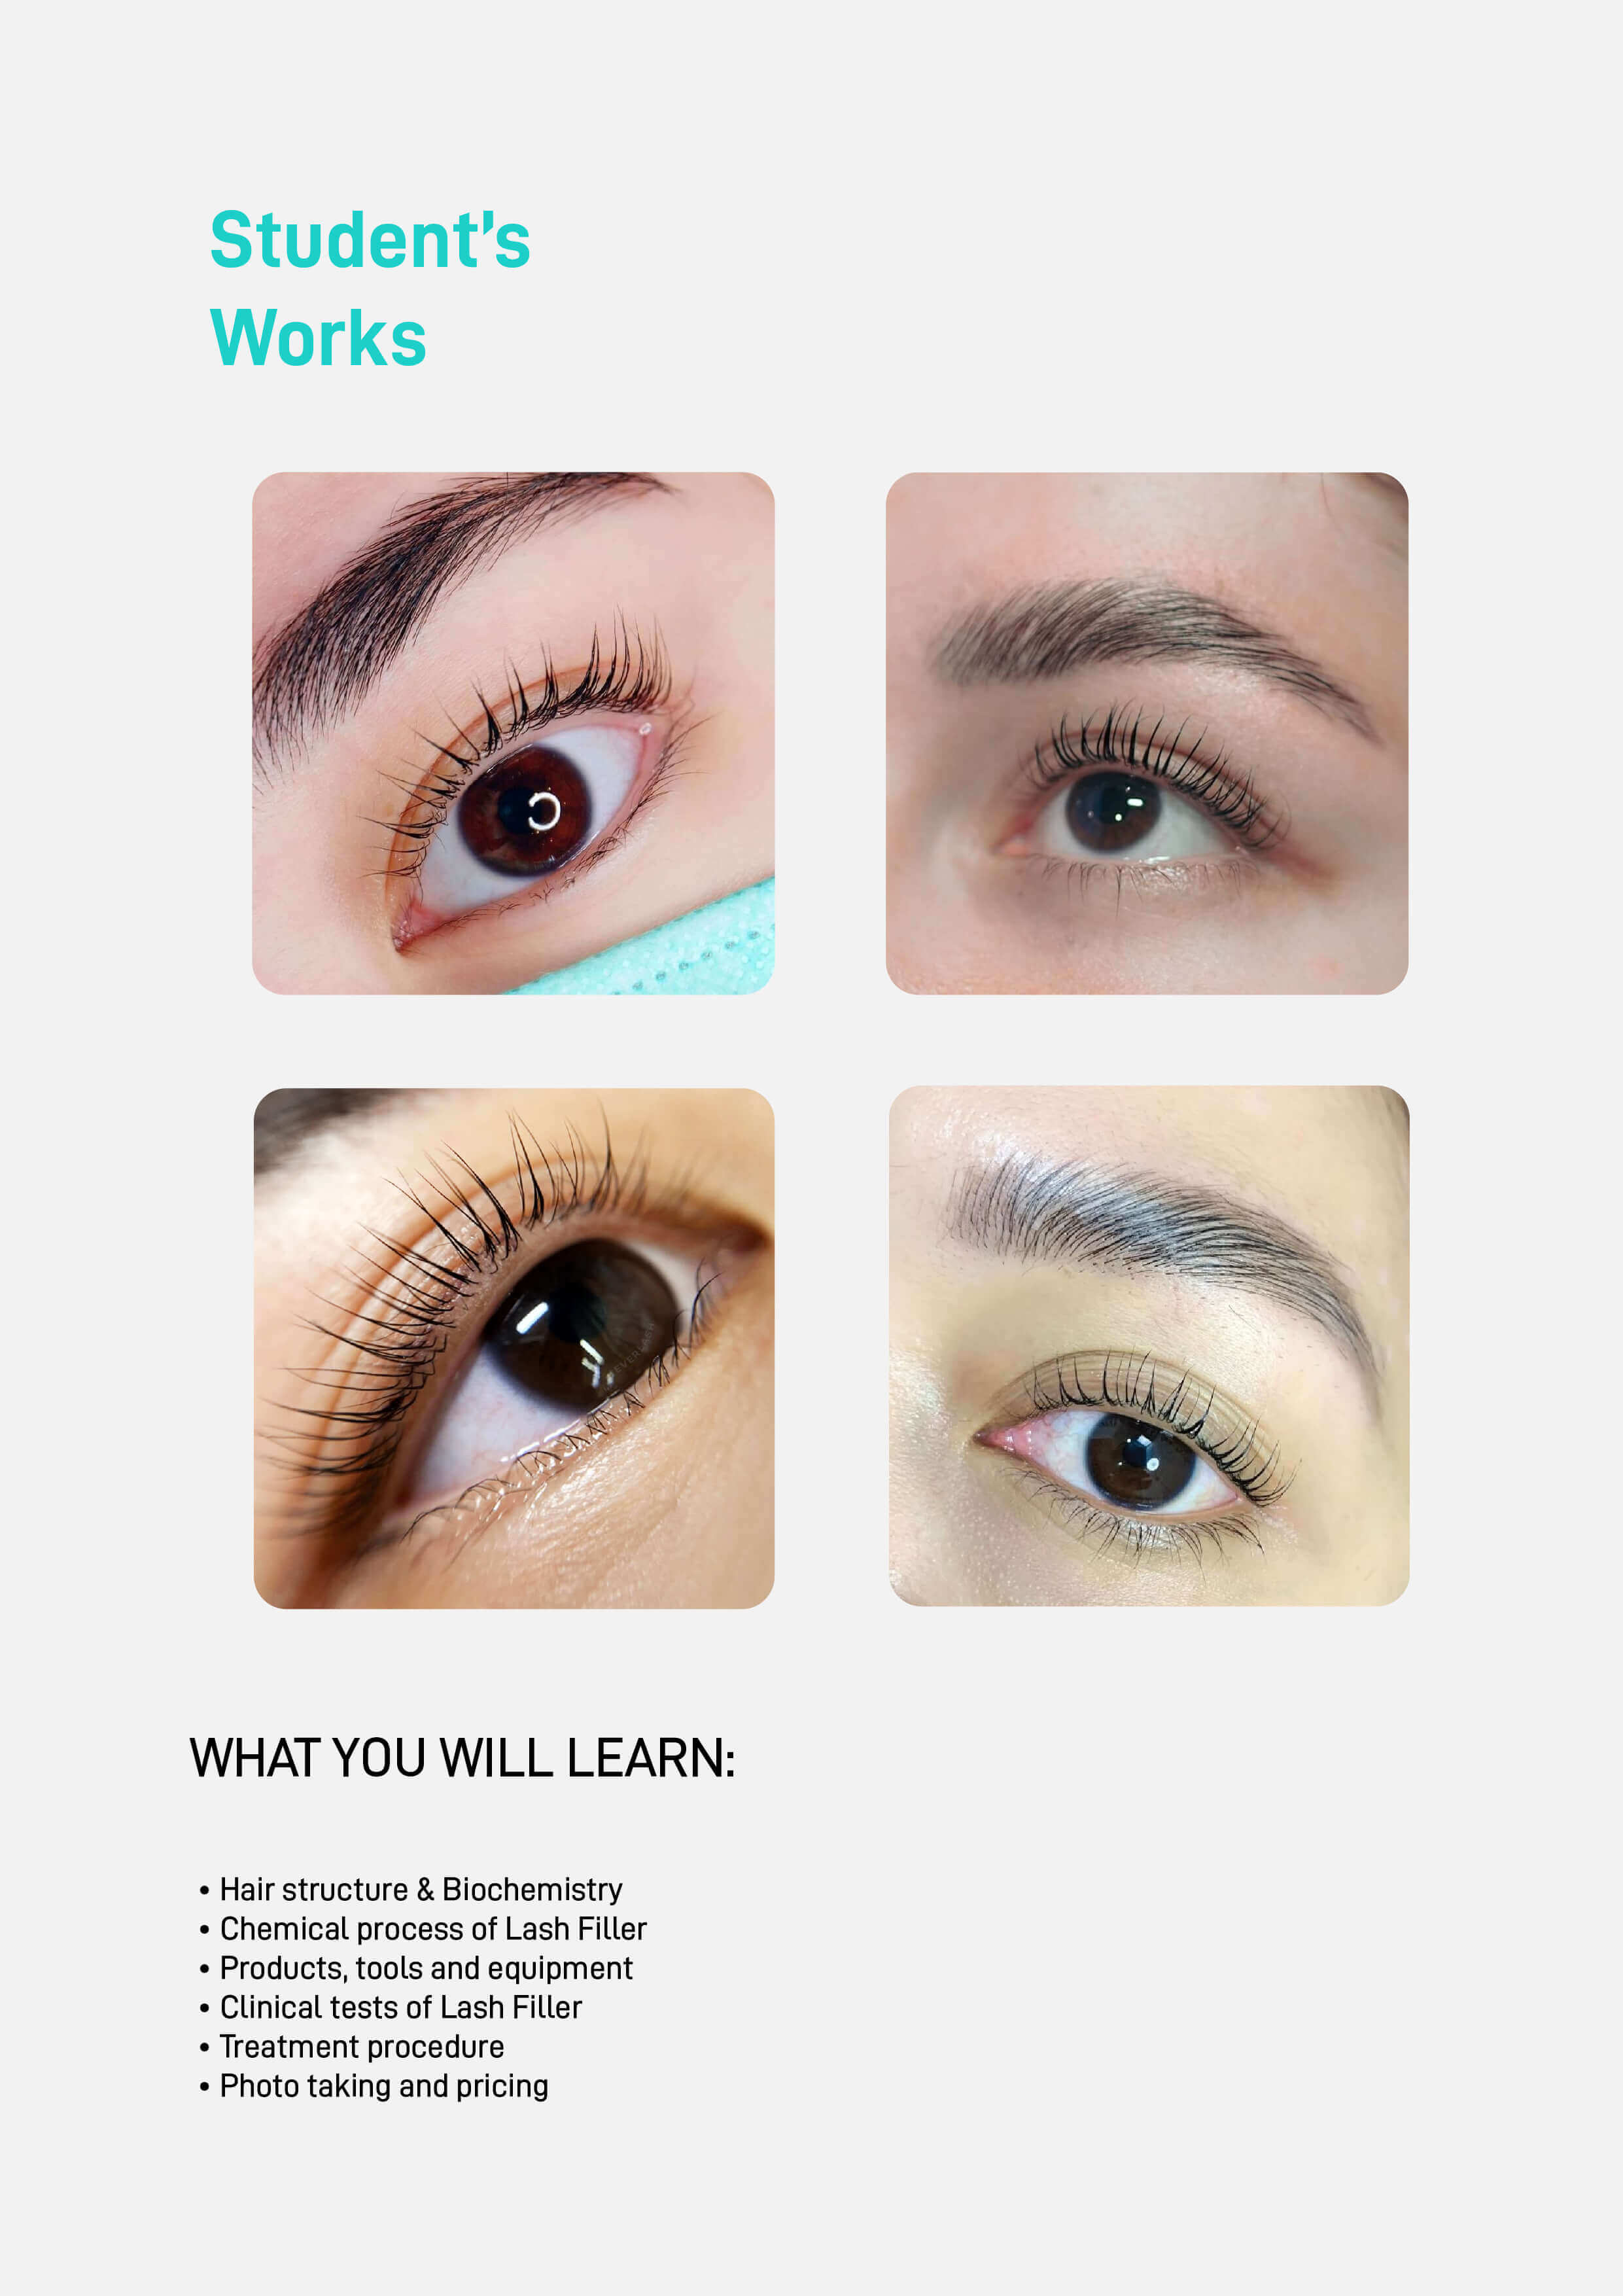 The Filler Lift  Conversion Course (Using InLei products) - Lavere Lash